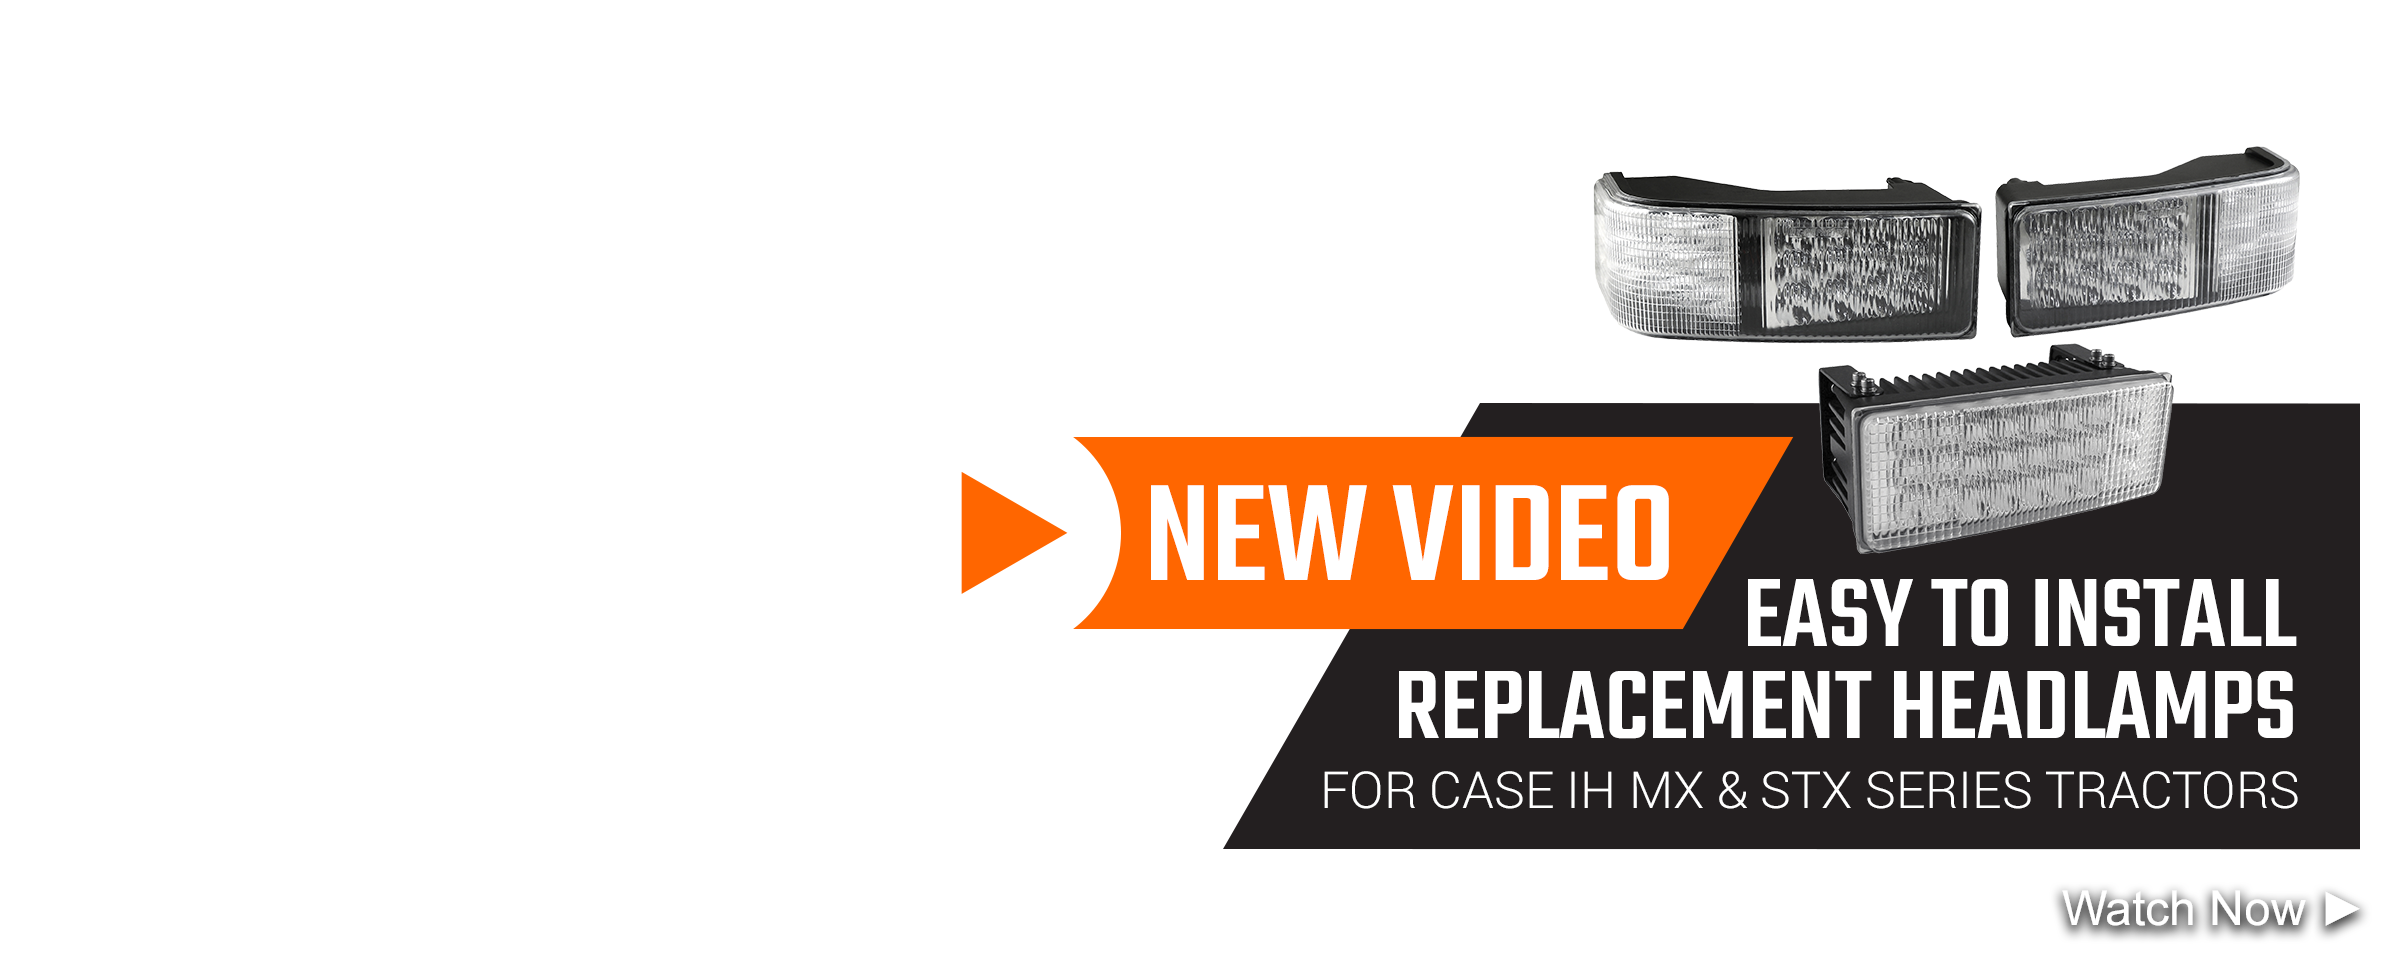 Easy to install headlights video for Case MX STX